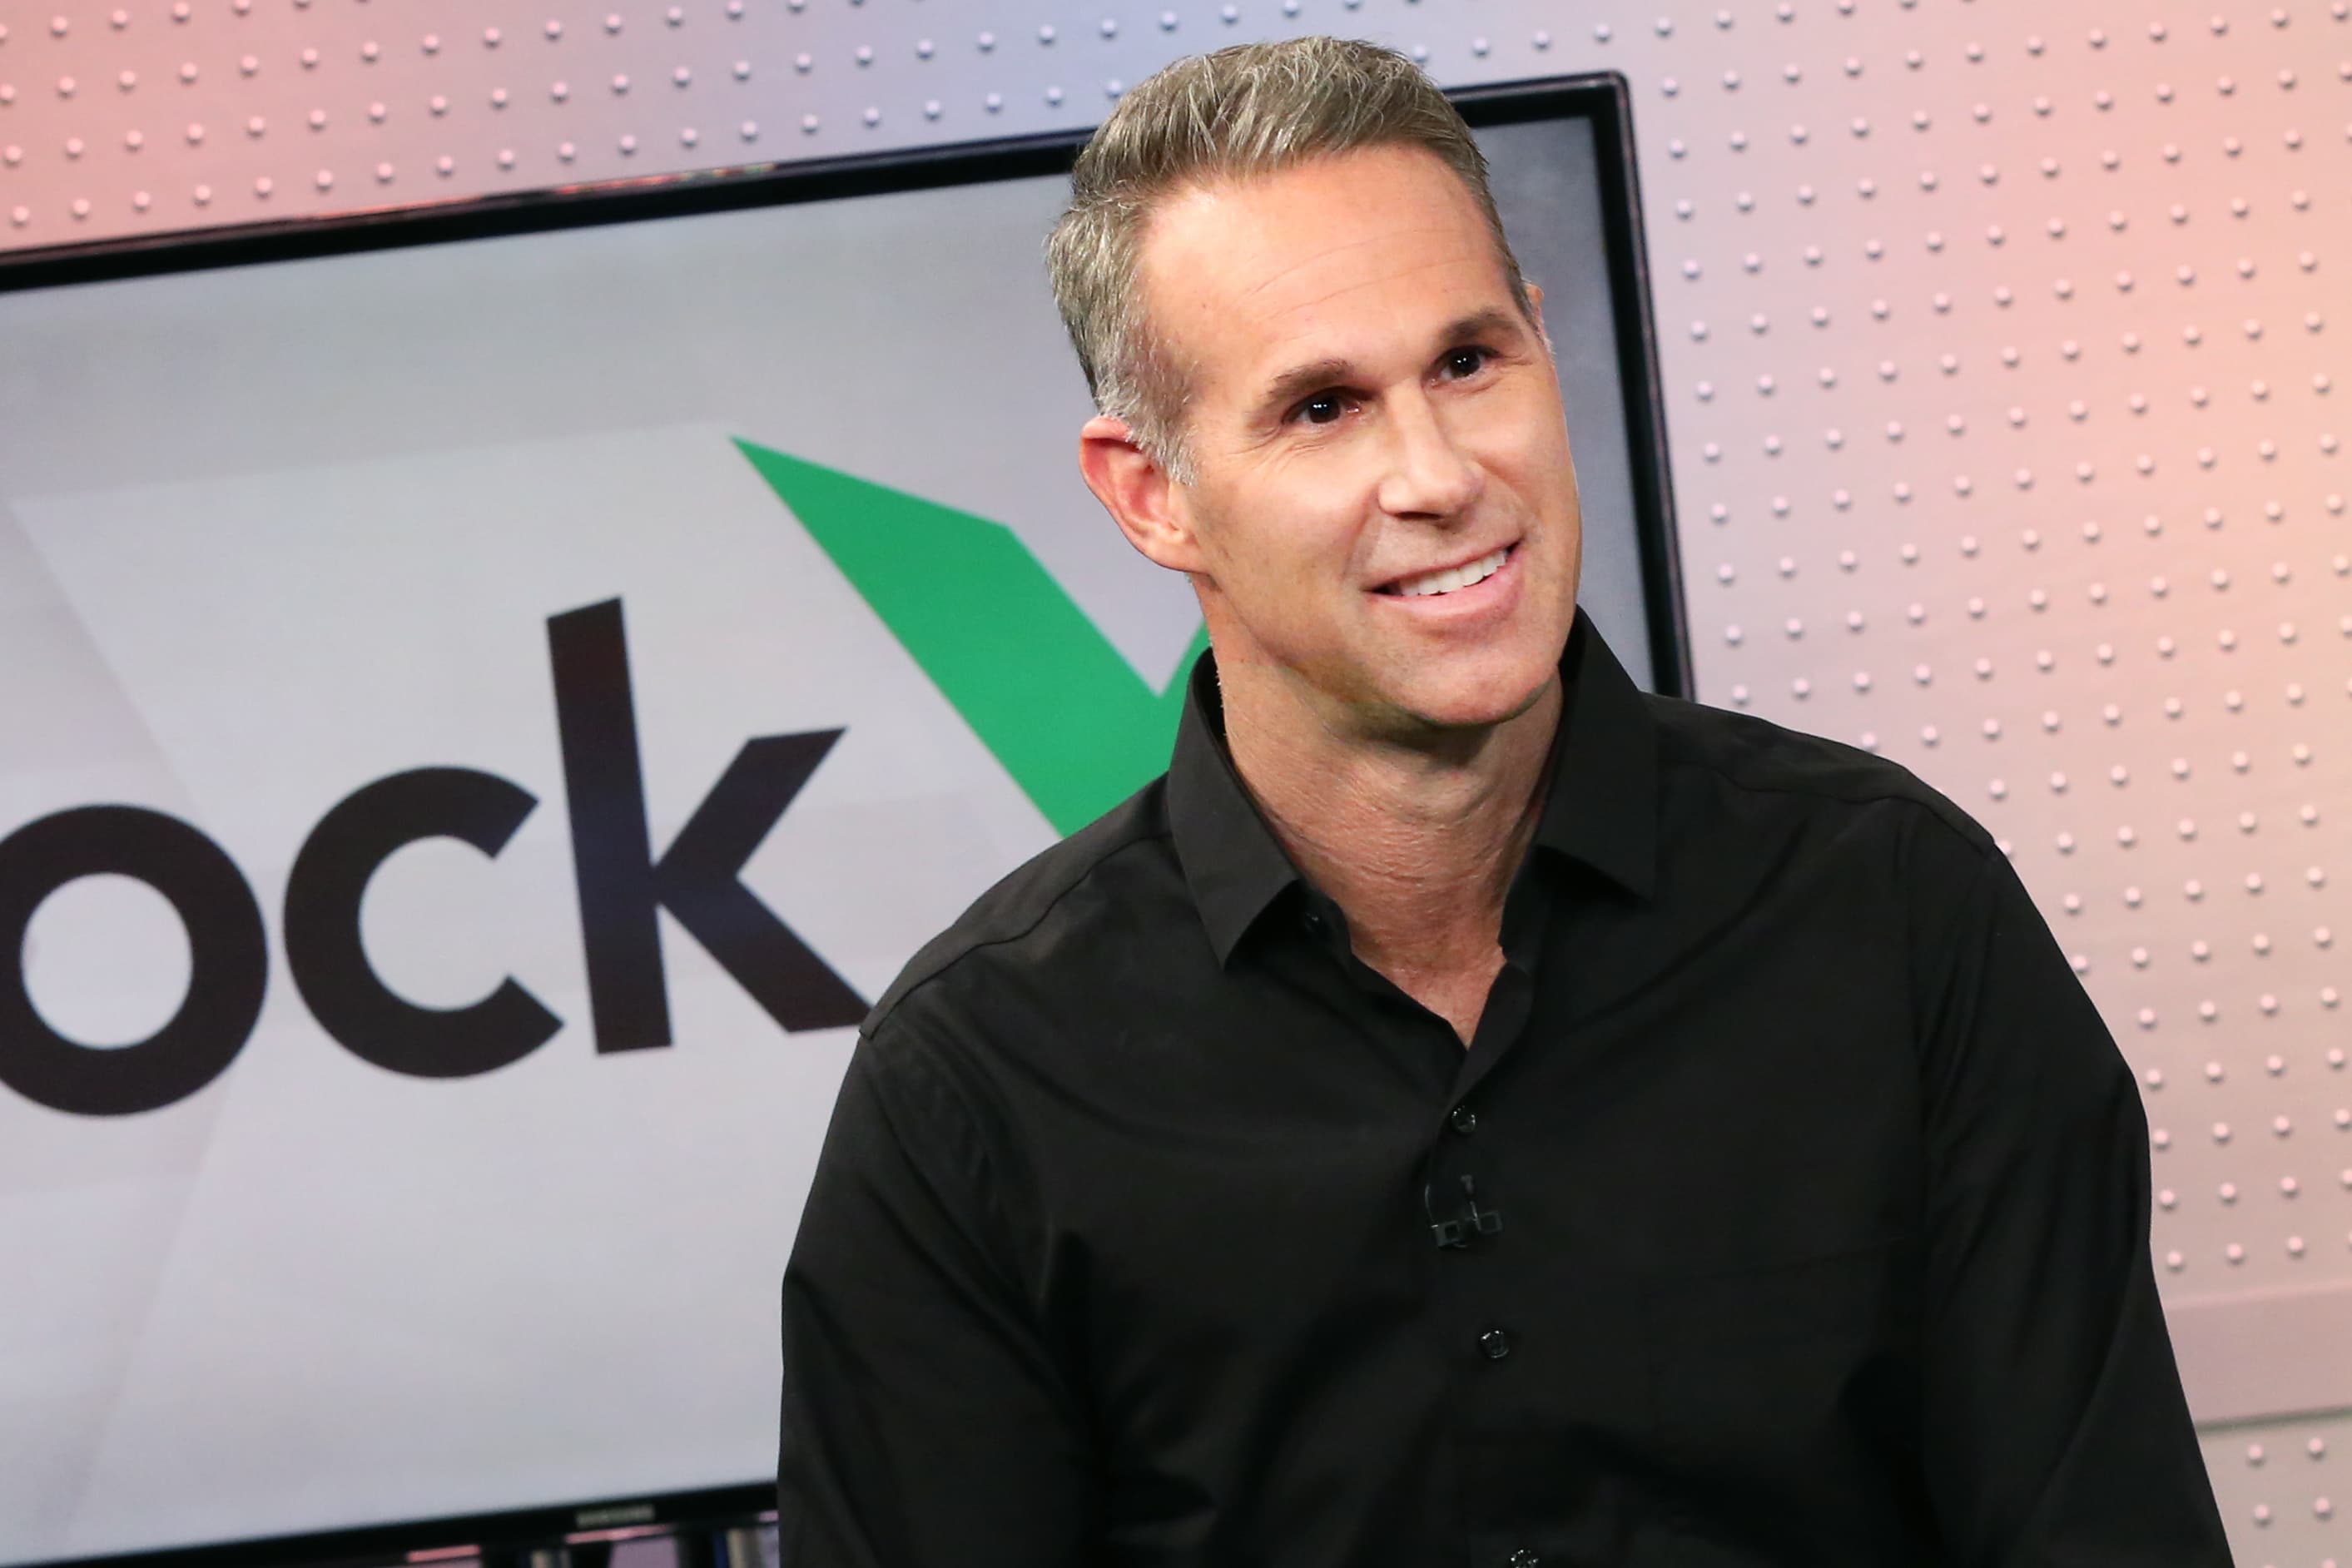 The valuation of the StockX sneaker reseller jumps to $ 3.8 billion